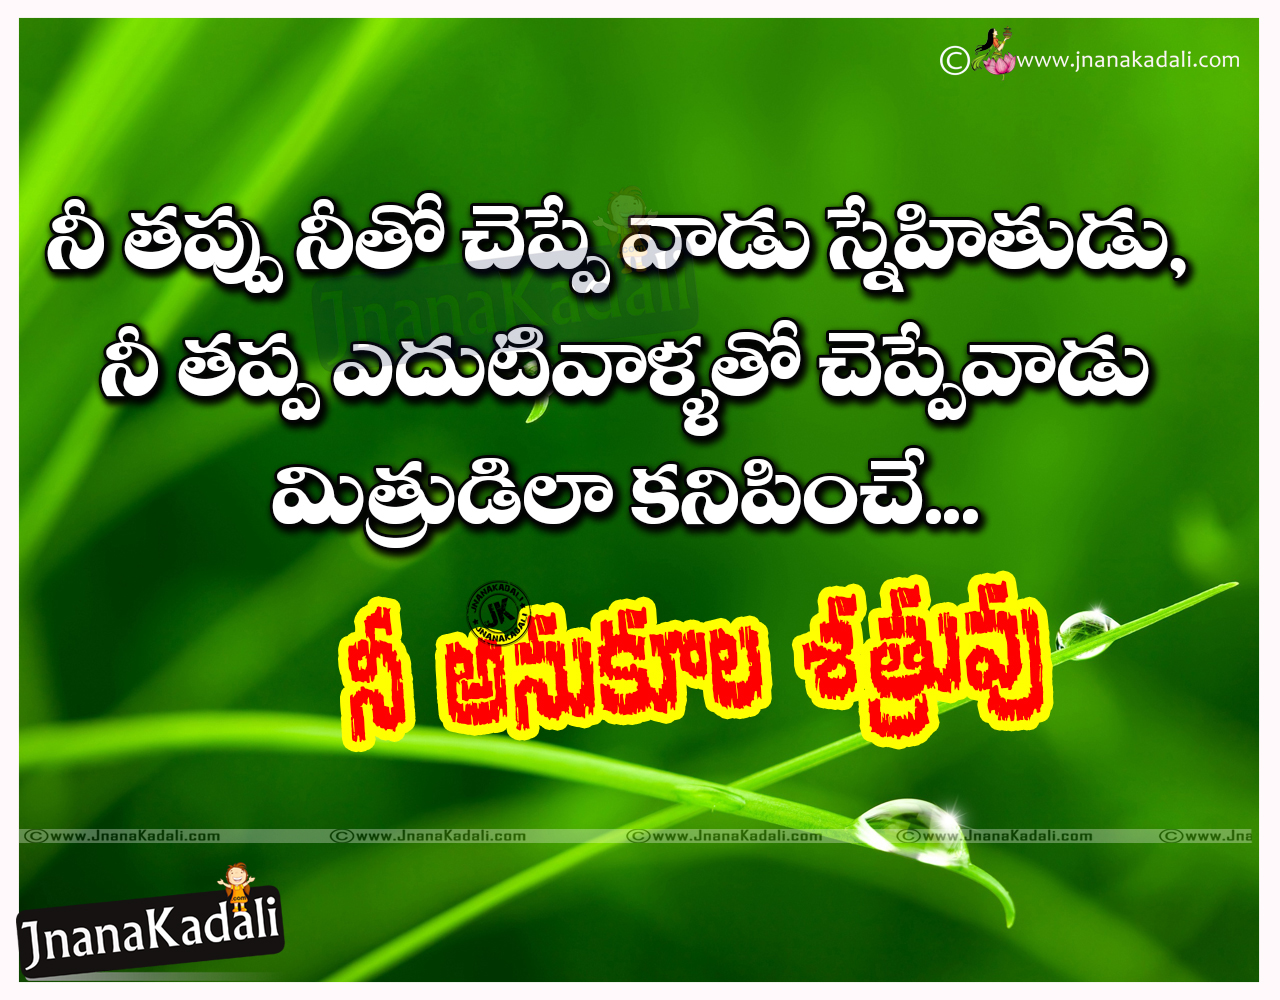 Telugu Heart touching Quotations about Friendship with hd Wallpapers |  JNANA  |Telugu Quotes|English quotes|Hindi quotes|Tamil  quotes|Dharmasandehalu|